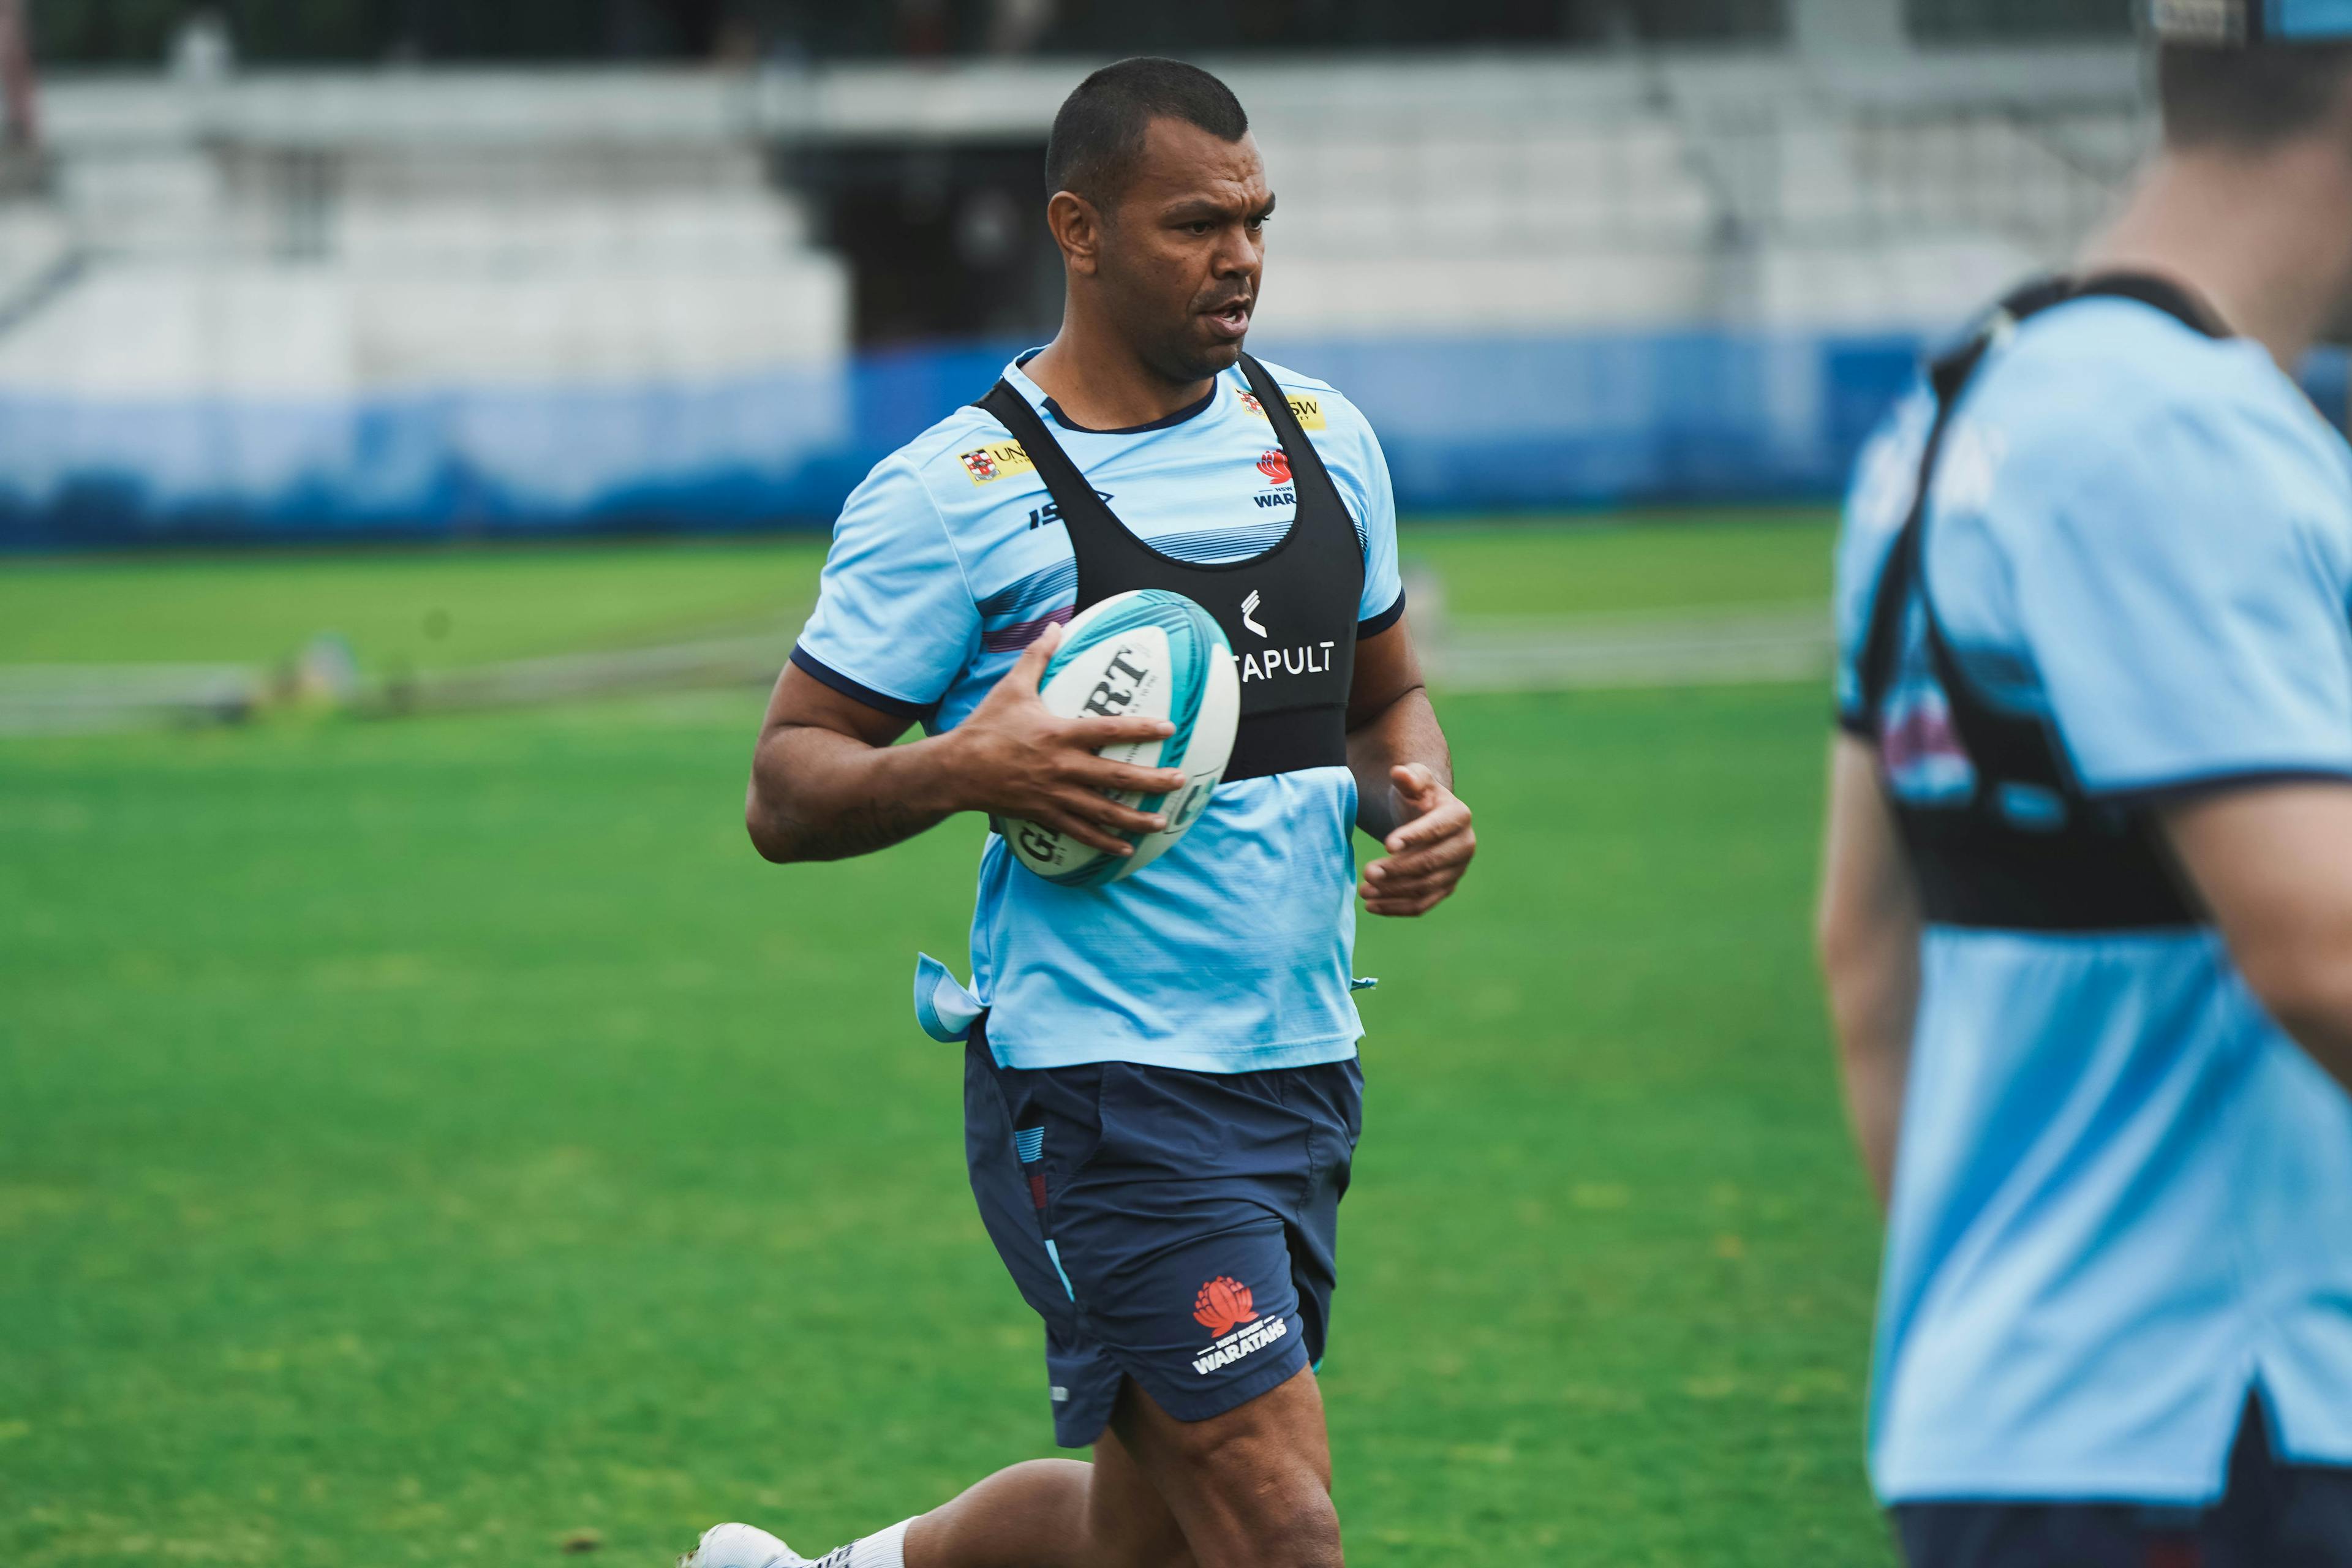 Kurtley Beale is among seven Waratahs selected in the Wallabies squad to face the All Blacks